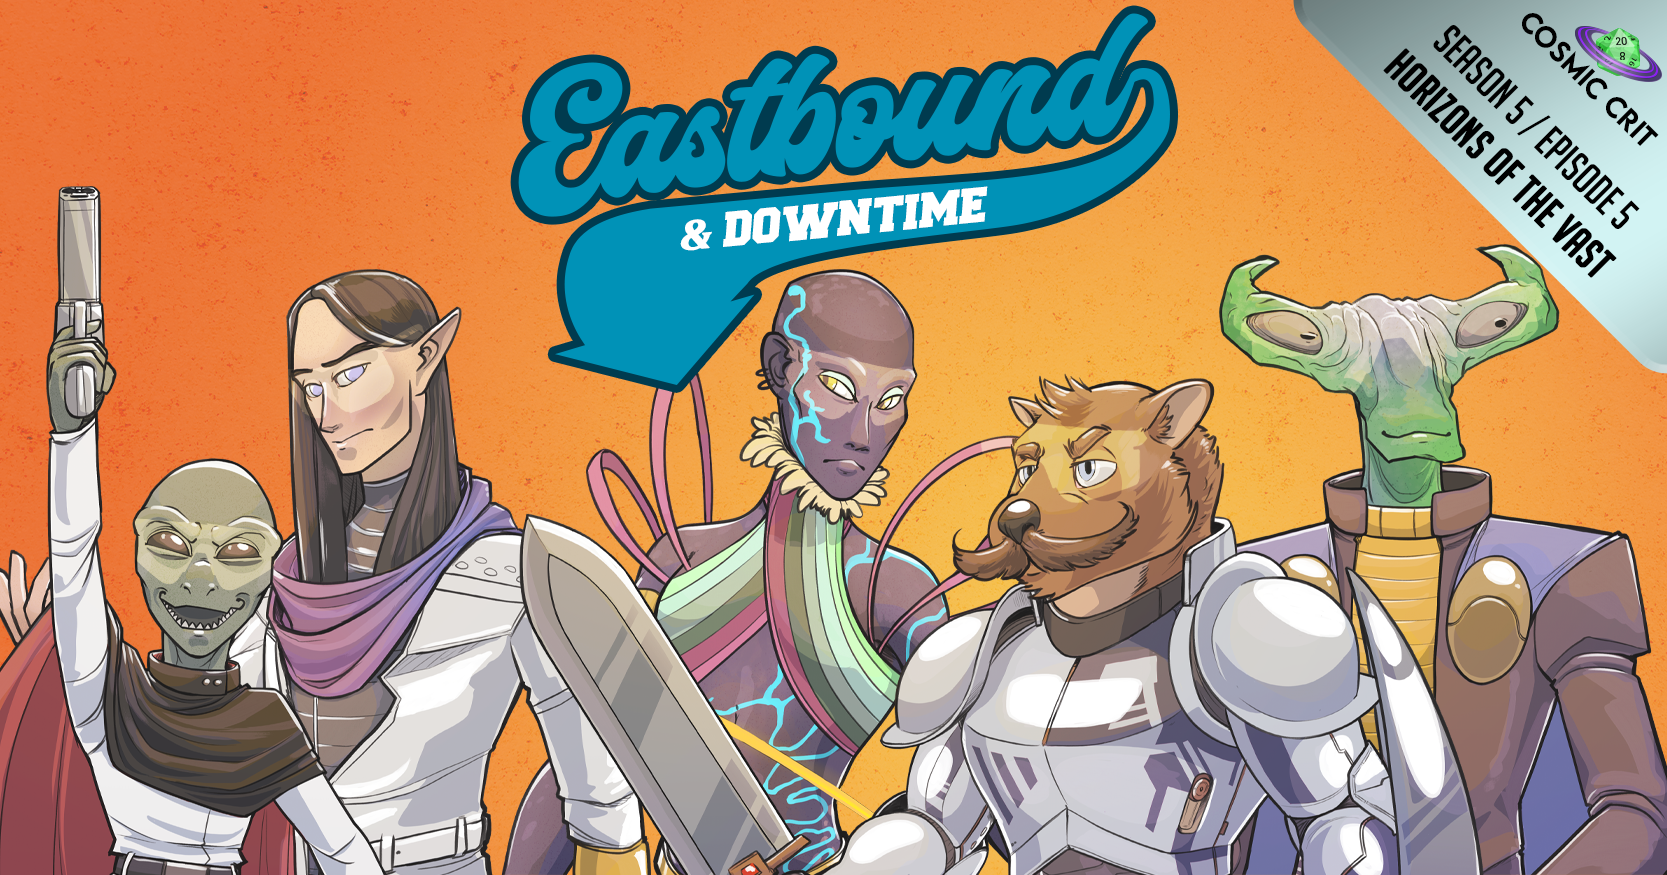 S5 | 267: Eastbound and Downtime